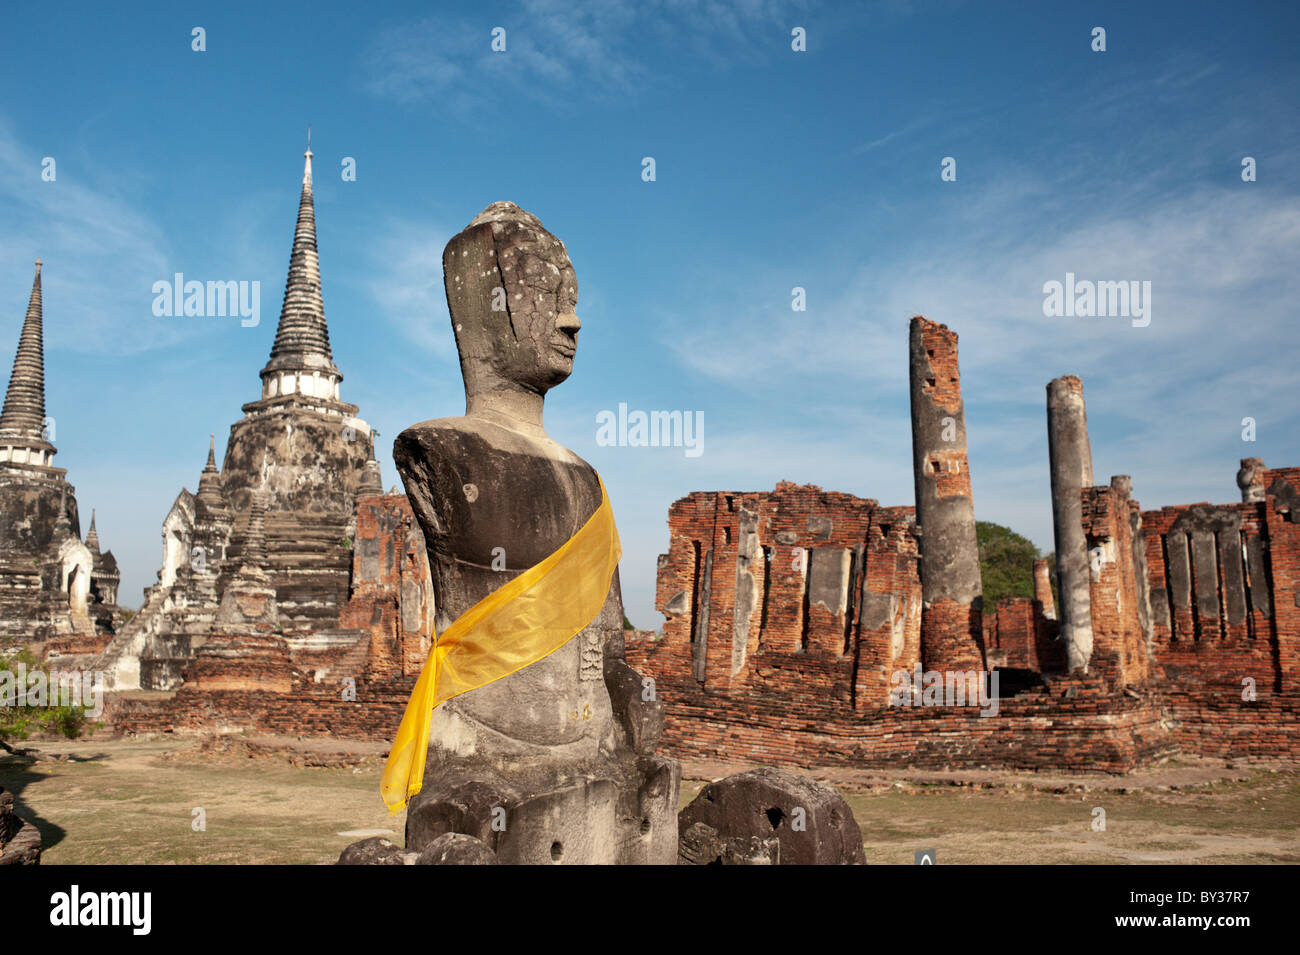 Buddha statue at the UNSECO World Heritage Site in Ayutthaya, Thailand, Asia. Stock Photo